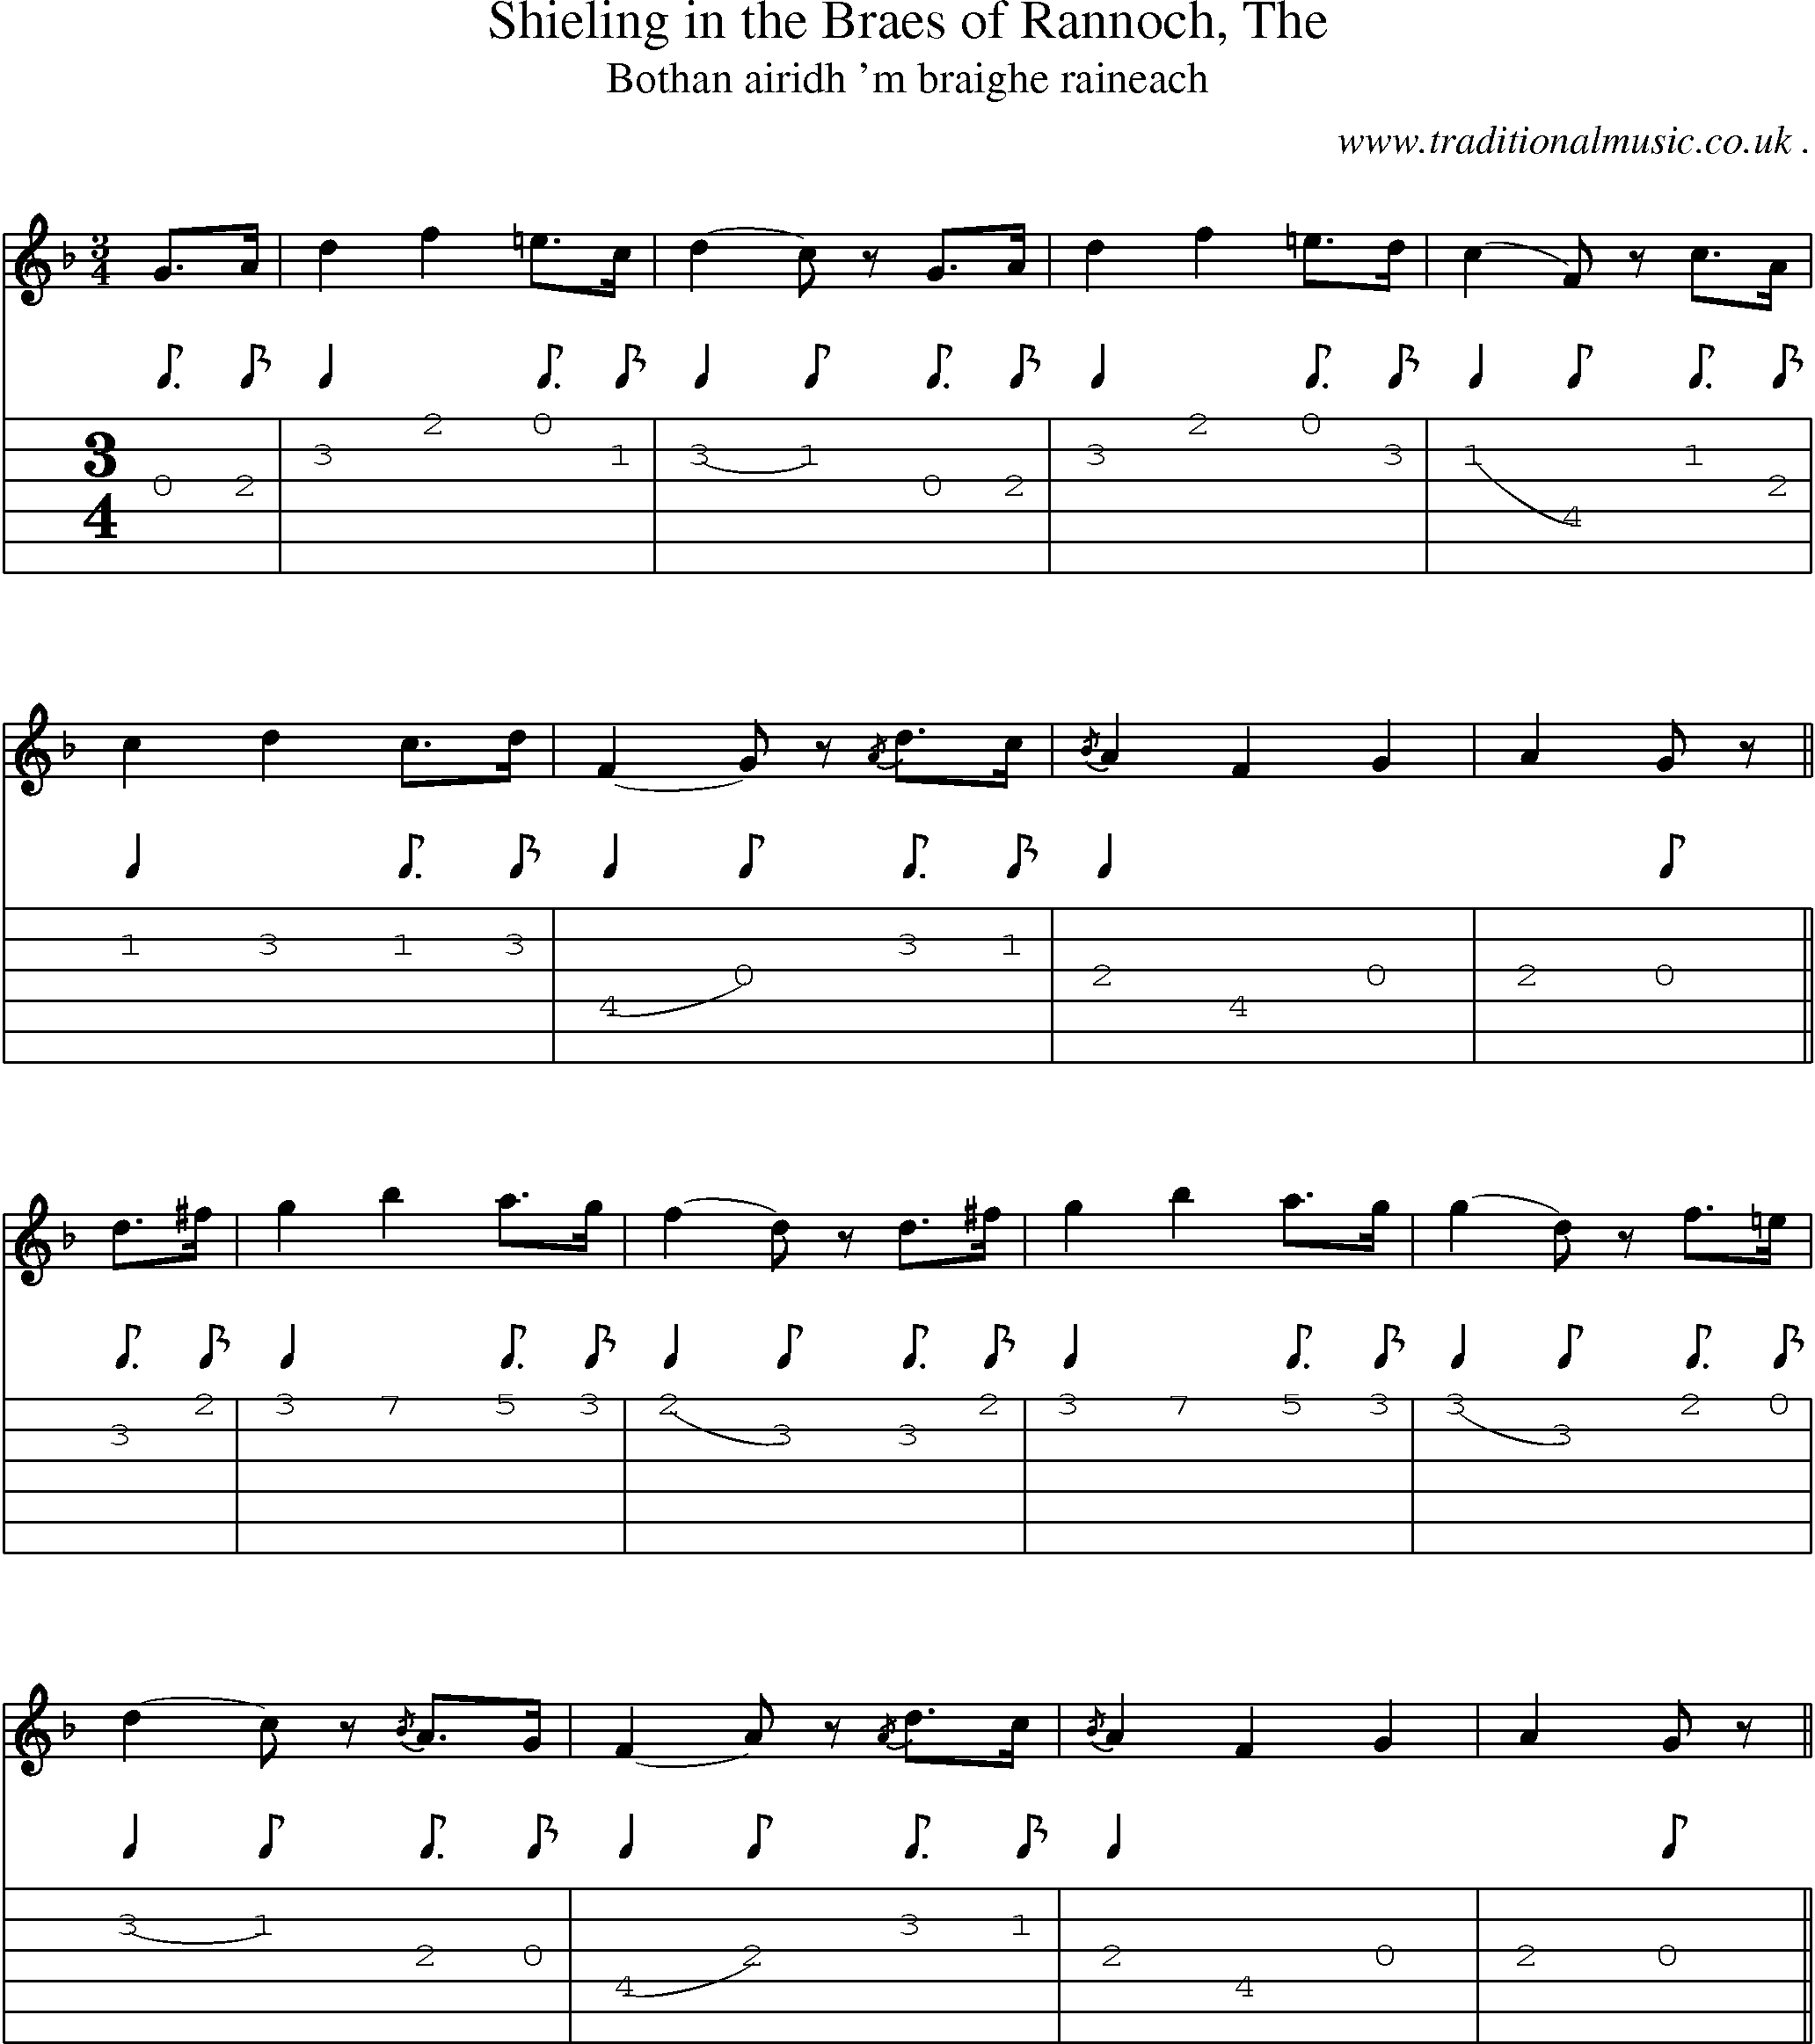 Sheet-music  score, Chords and Guitar Tabs for Shieling In The Braes Of Rannoch The